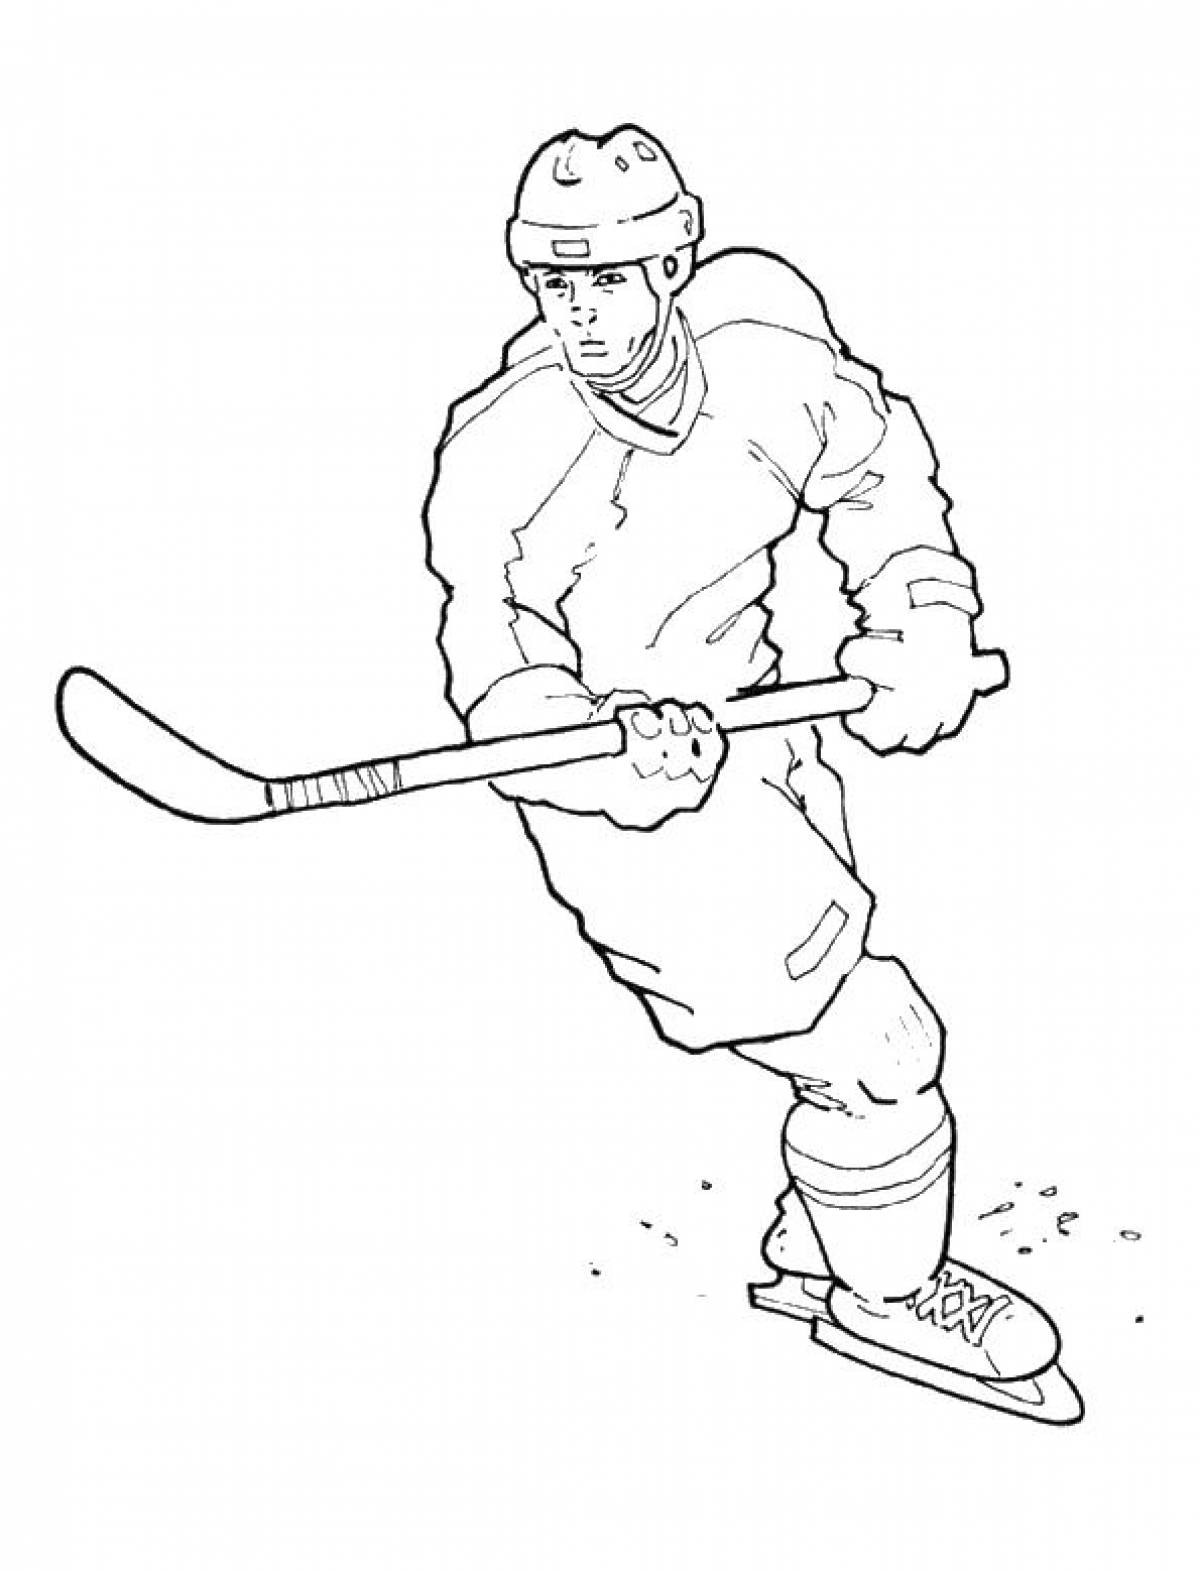 Hockey player coloring pages